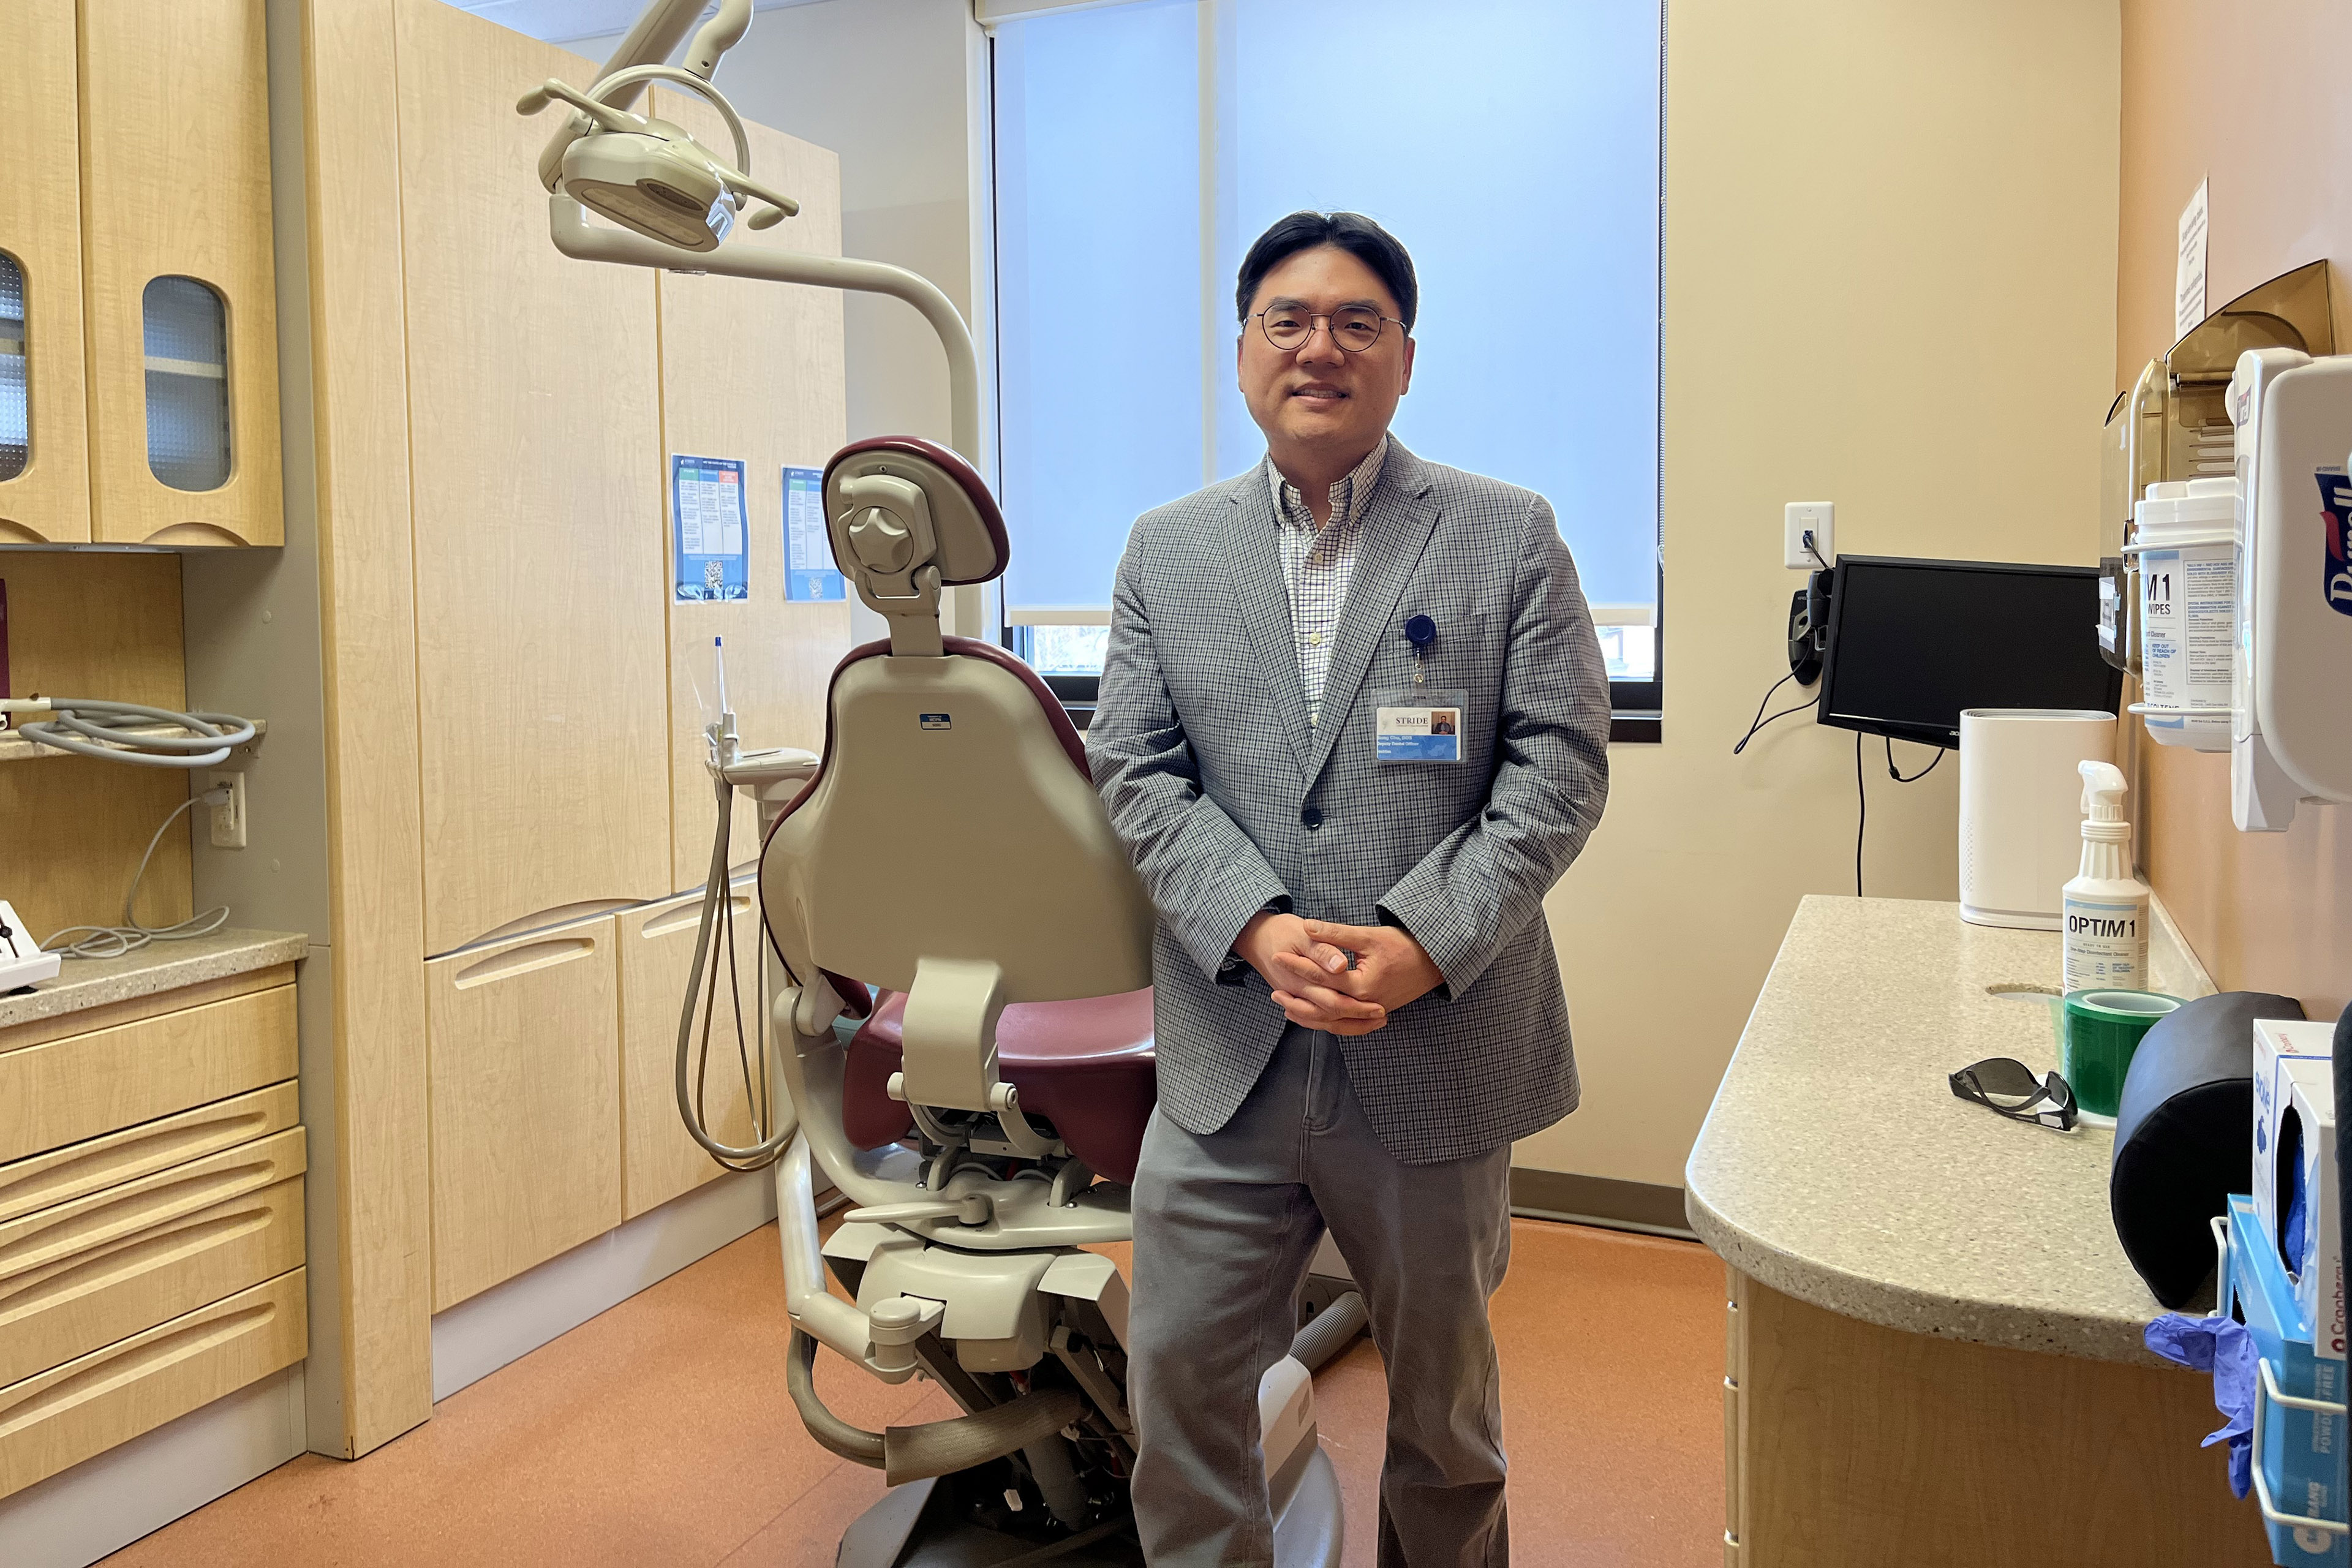 Sung Cho stands in an empty dental exam room.